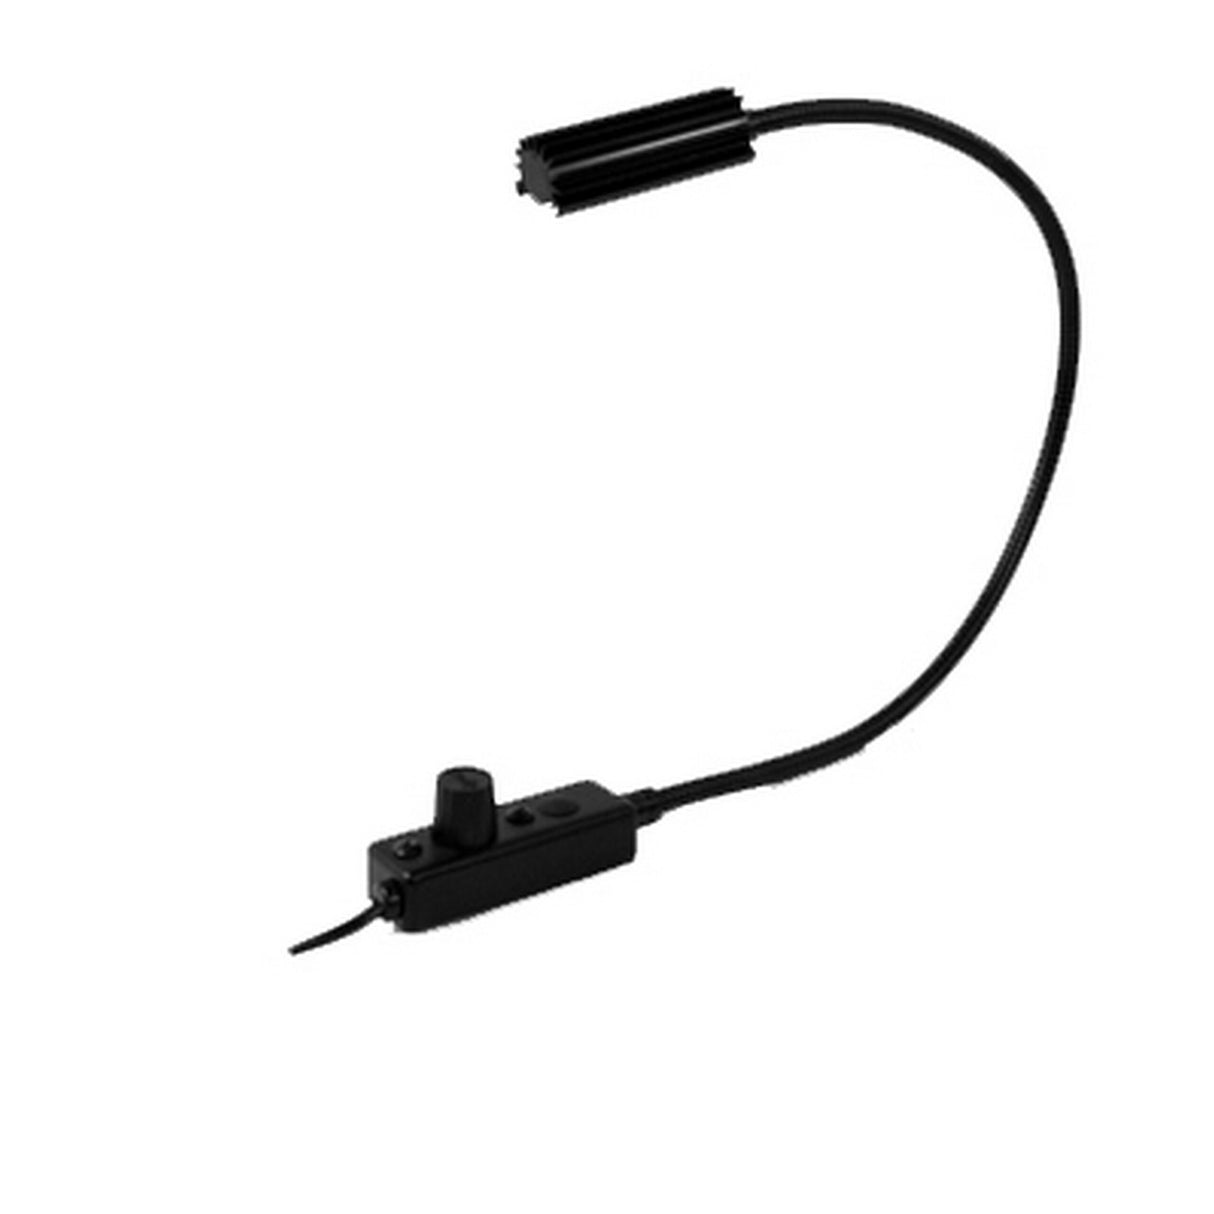 Littlite L-7/6E 6 Inch High Intensity Gooseneck Lampset with Permanent End-Mount, Euro Power Supply